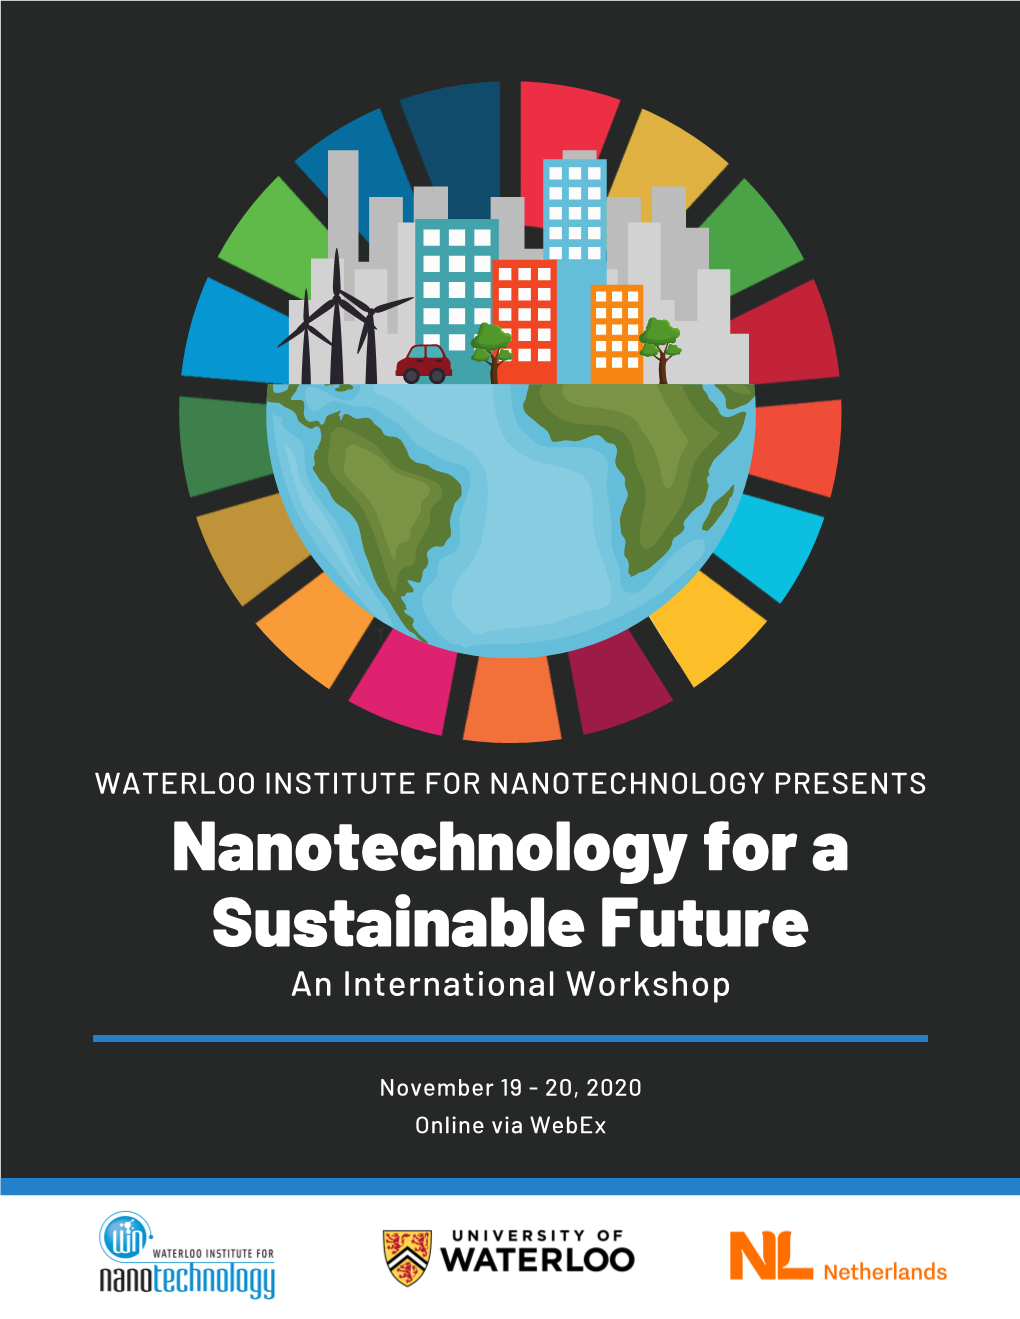 Nanotechnology for a Sustainable Future an International Workshop